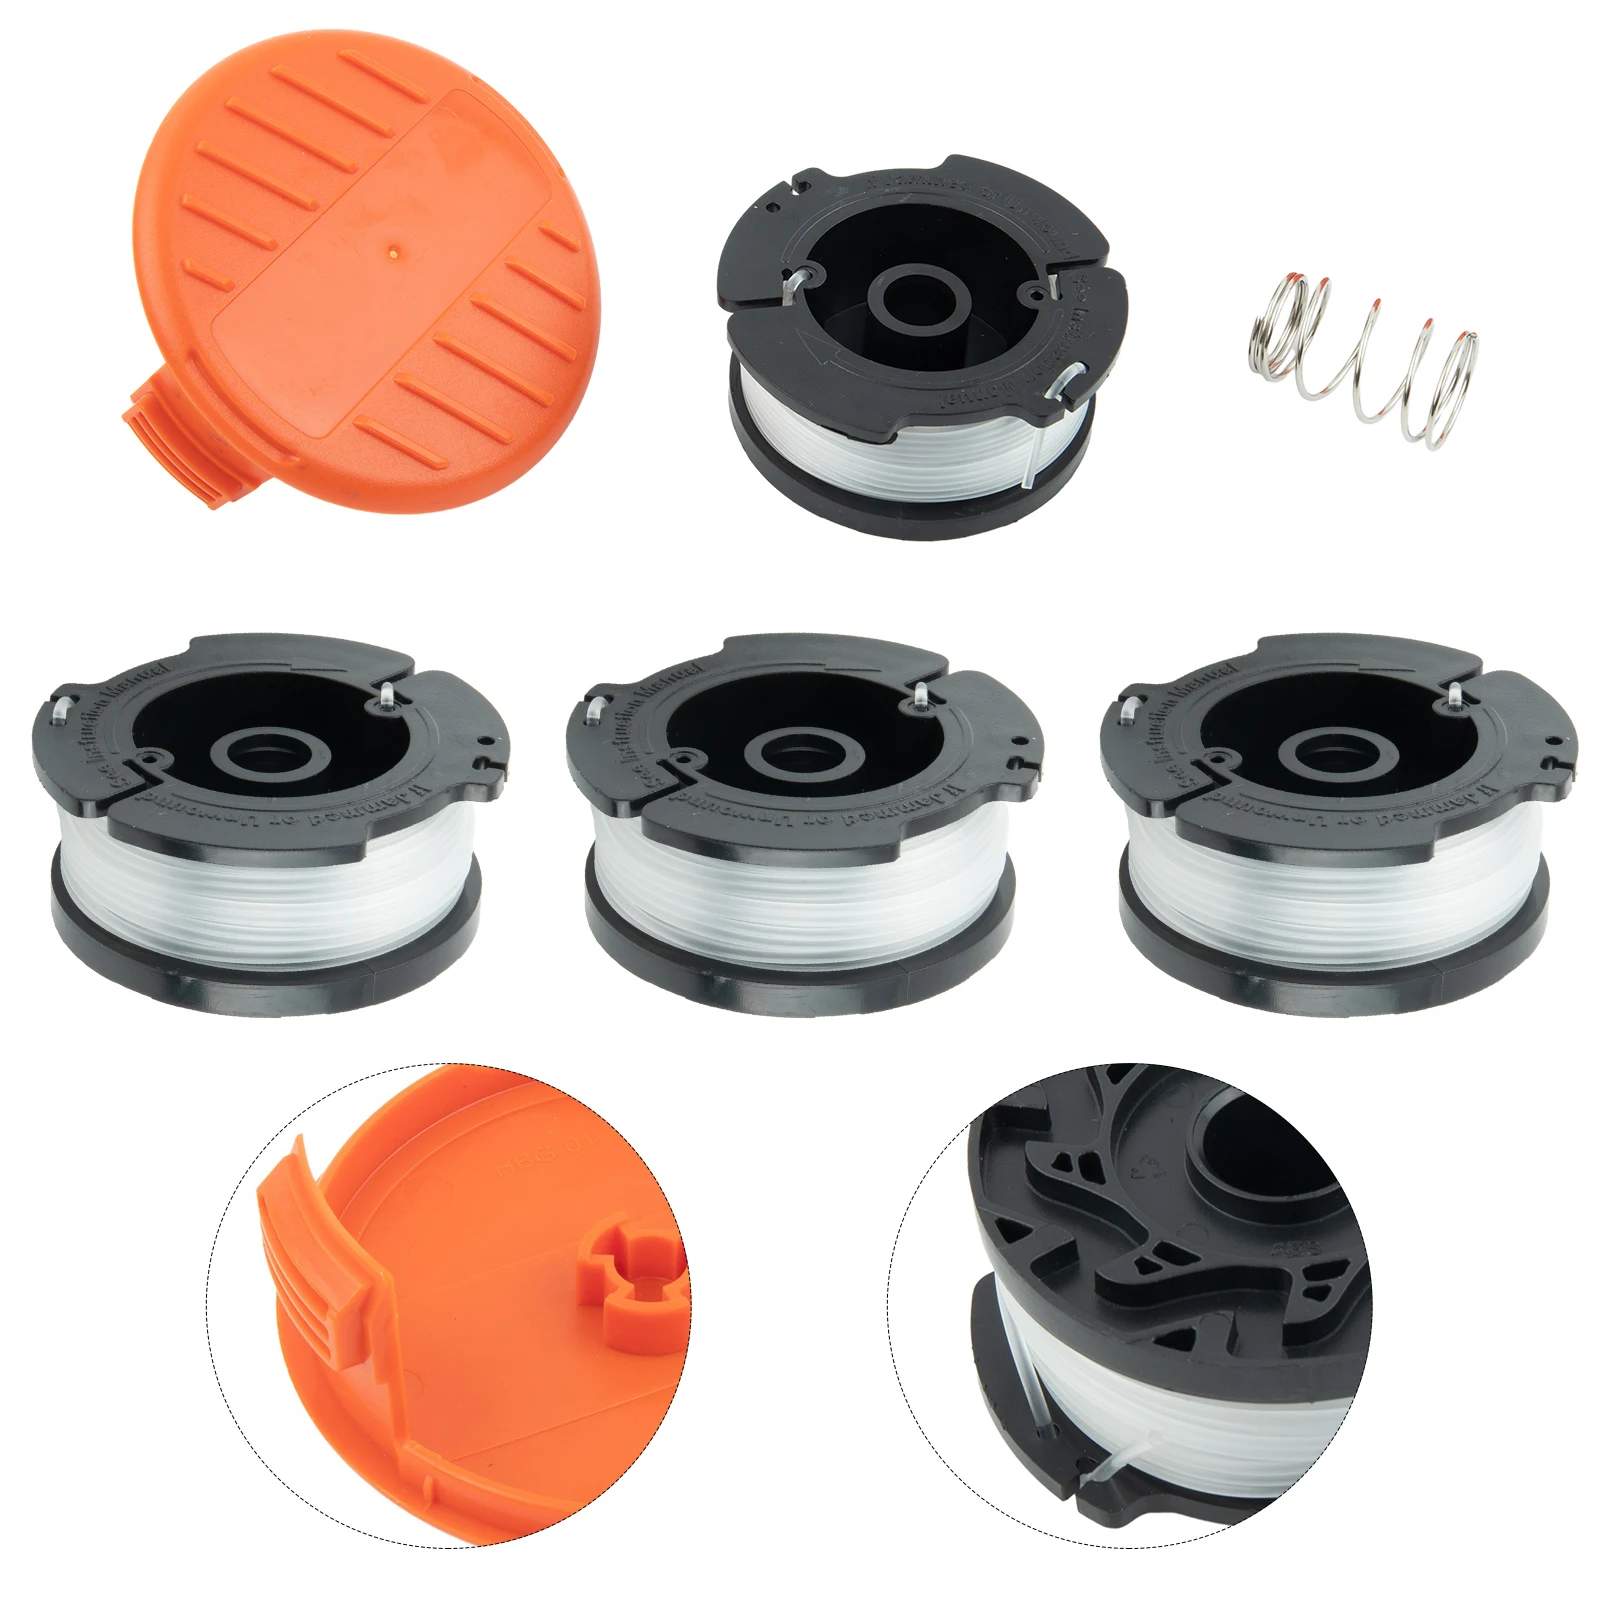 https://ae01.alicdn.com/kf/Sea0510e4fd8142dda68ed9462e9c6ca8S/With-Feathers-Spools-1-Set-Delicate-Easy-To-Install-For-Black-Decker-Grass-Highly-Match-Lawn.jpeg